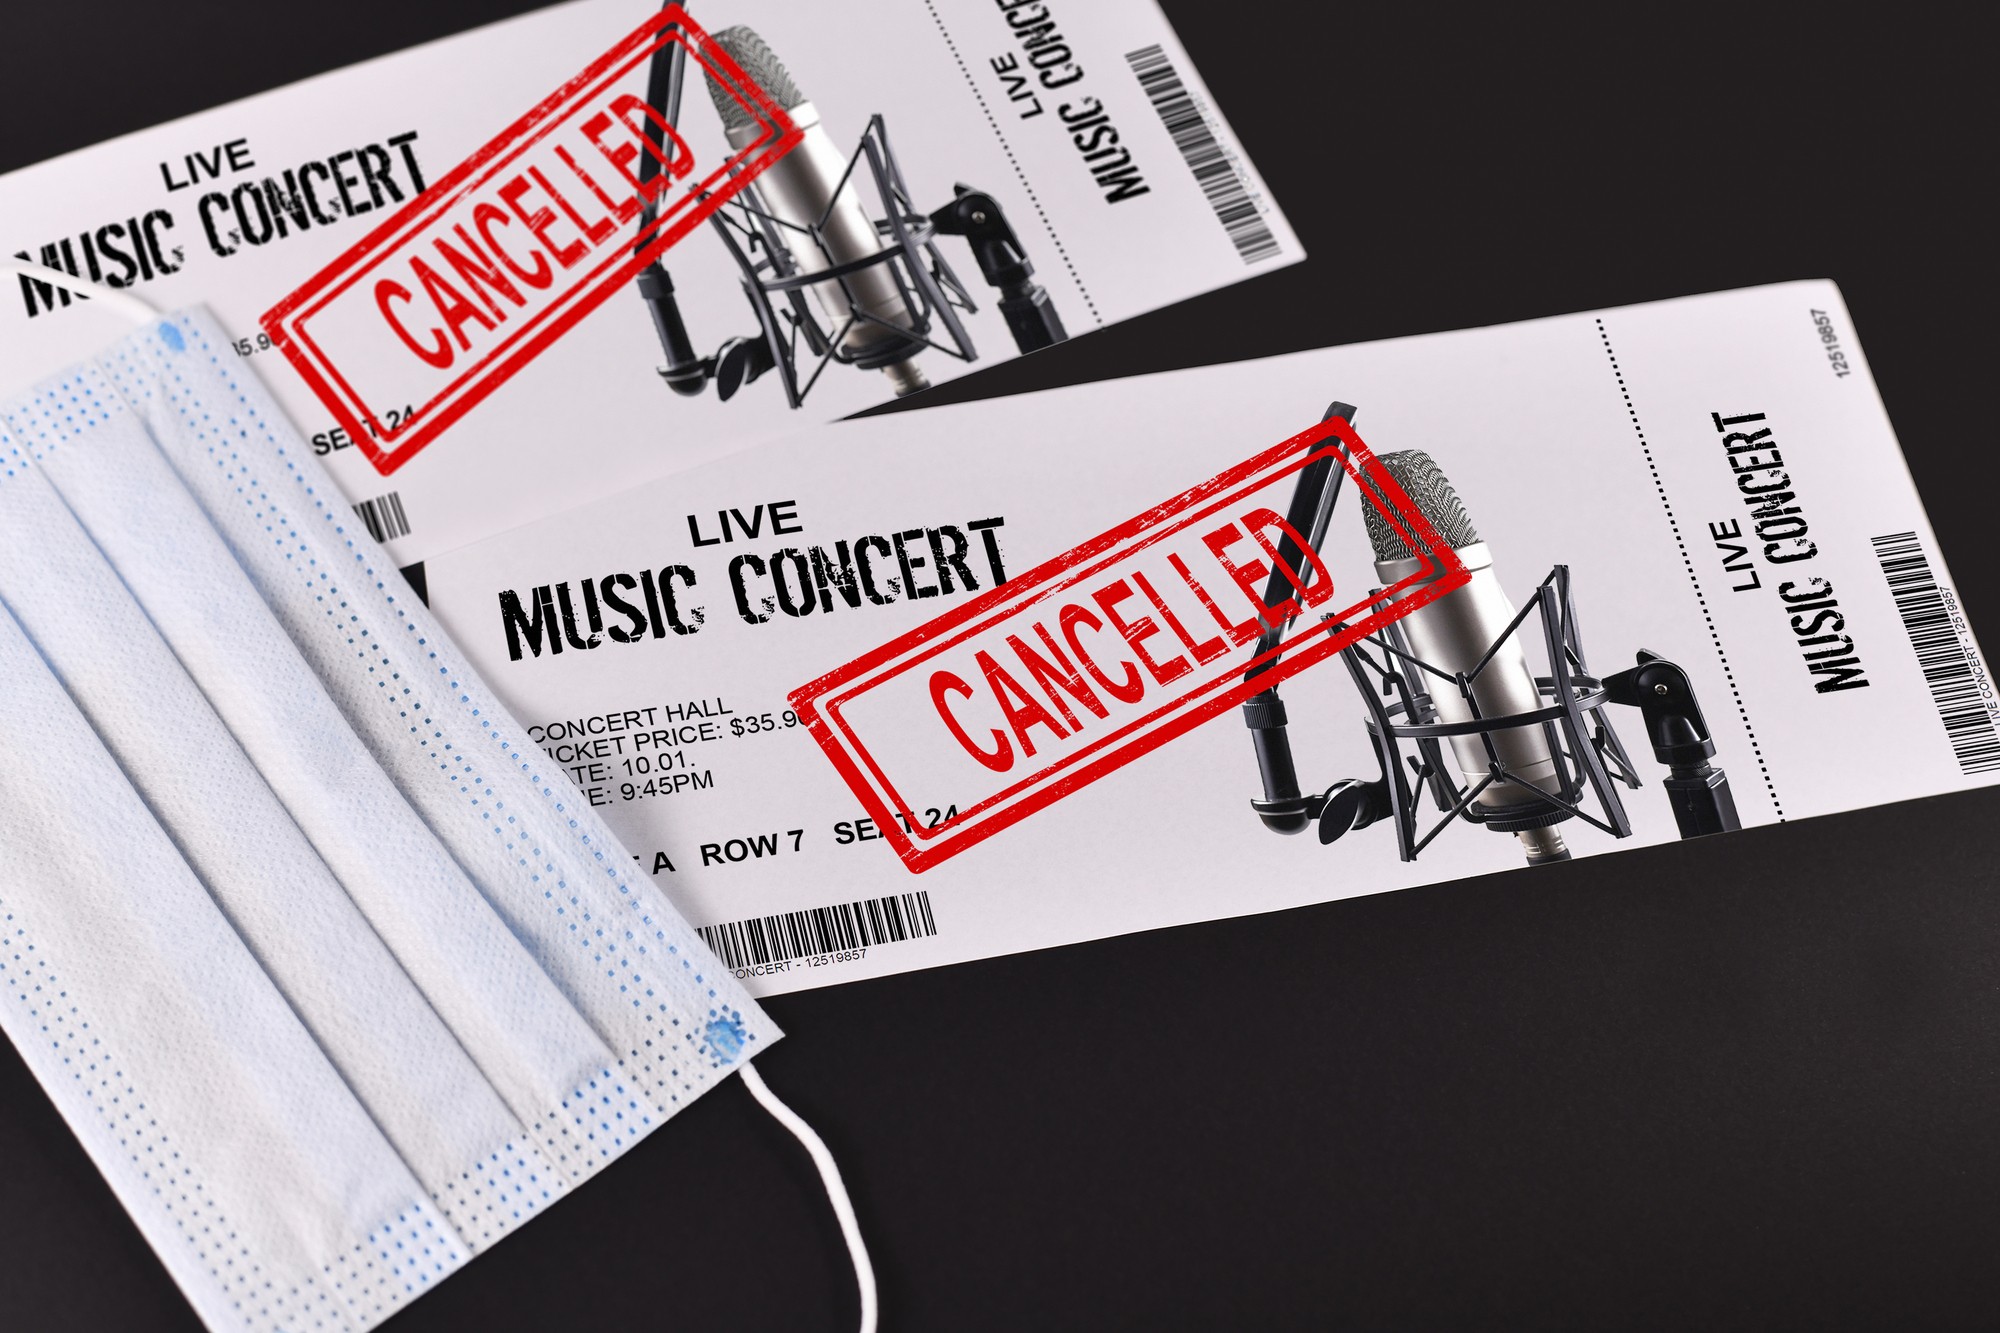 Brown Paper Tickets owe millions in event proceeds and refunds, claims Washington lawsuit